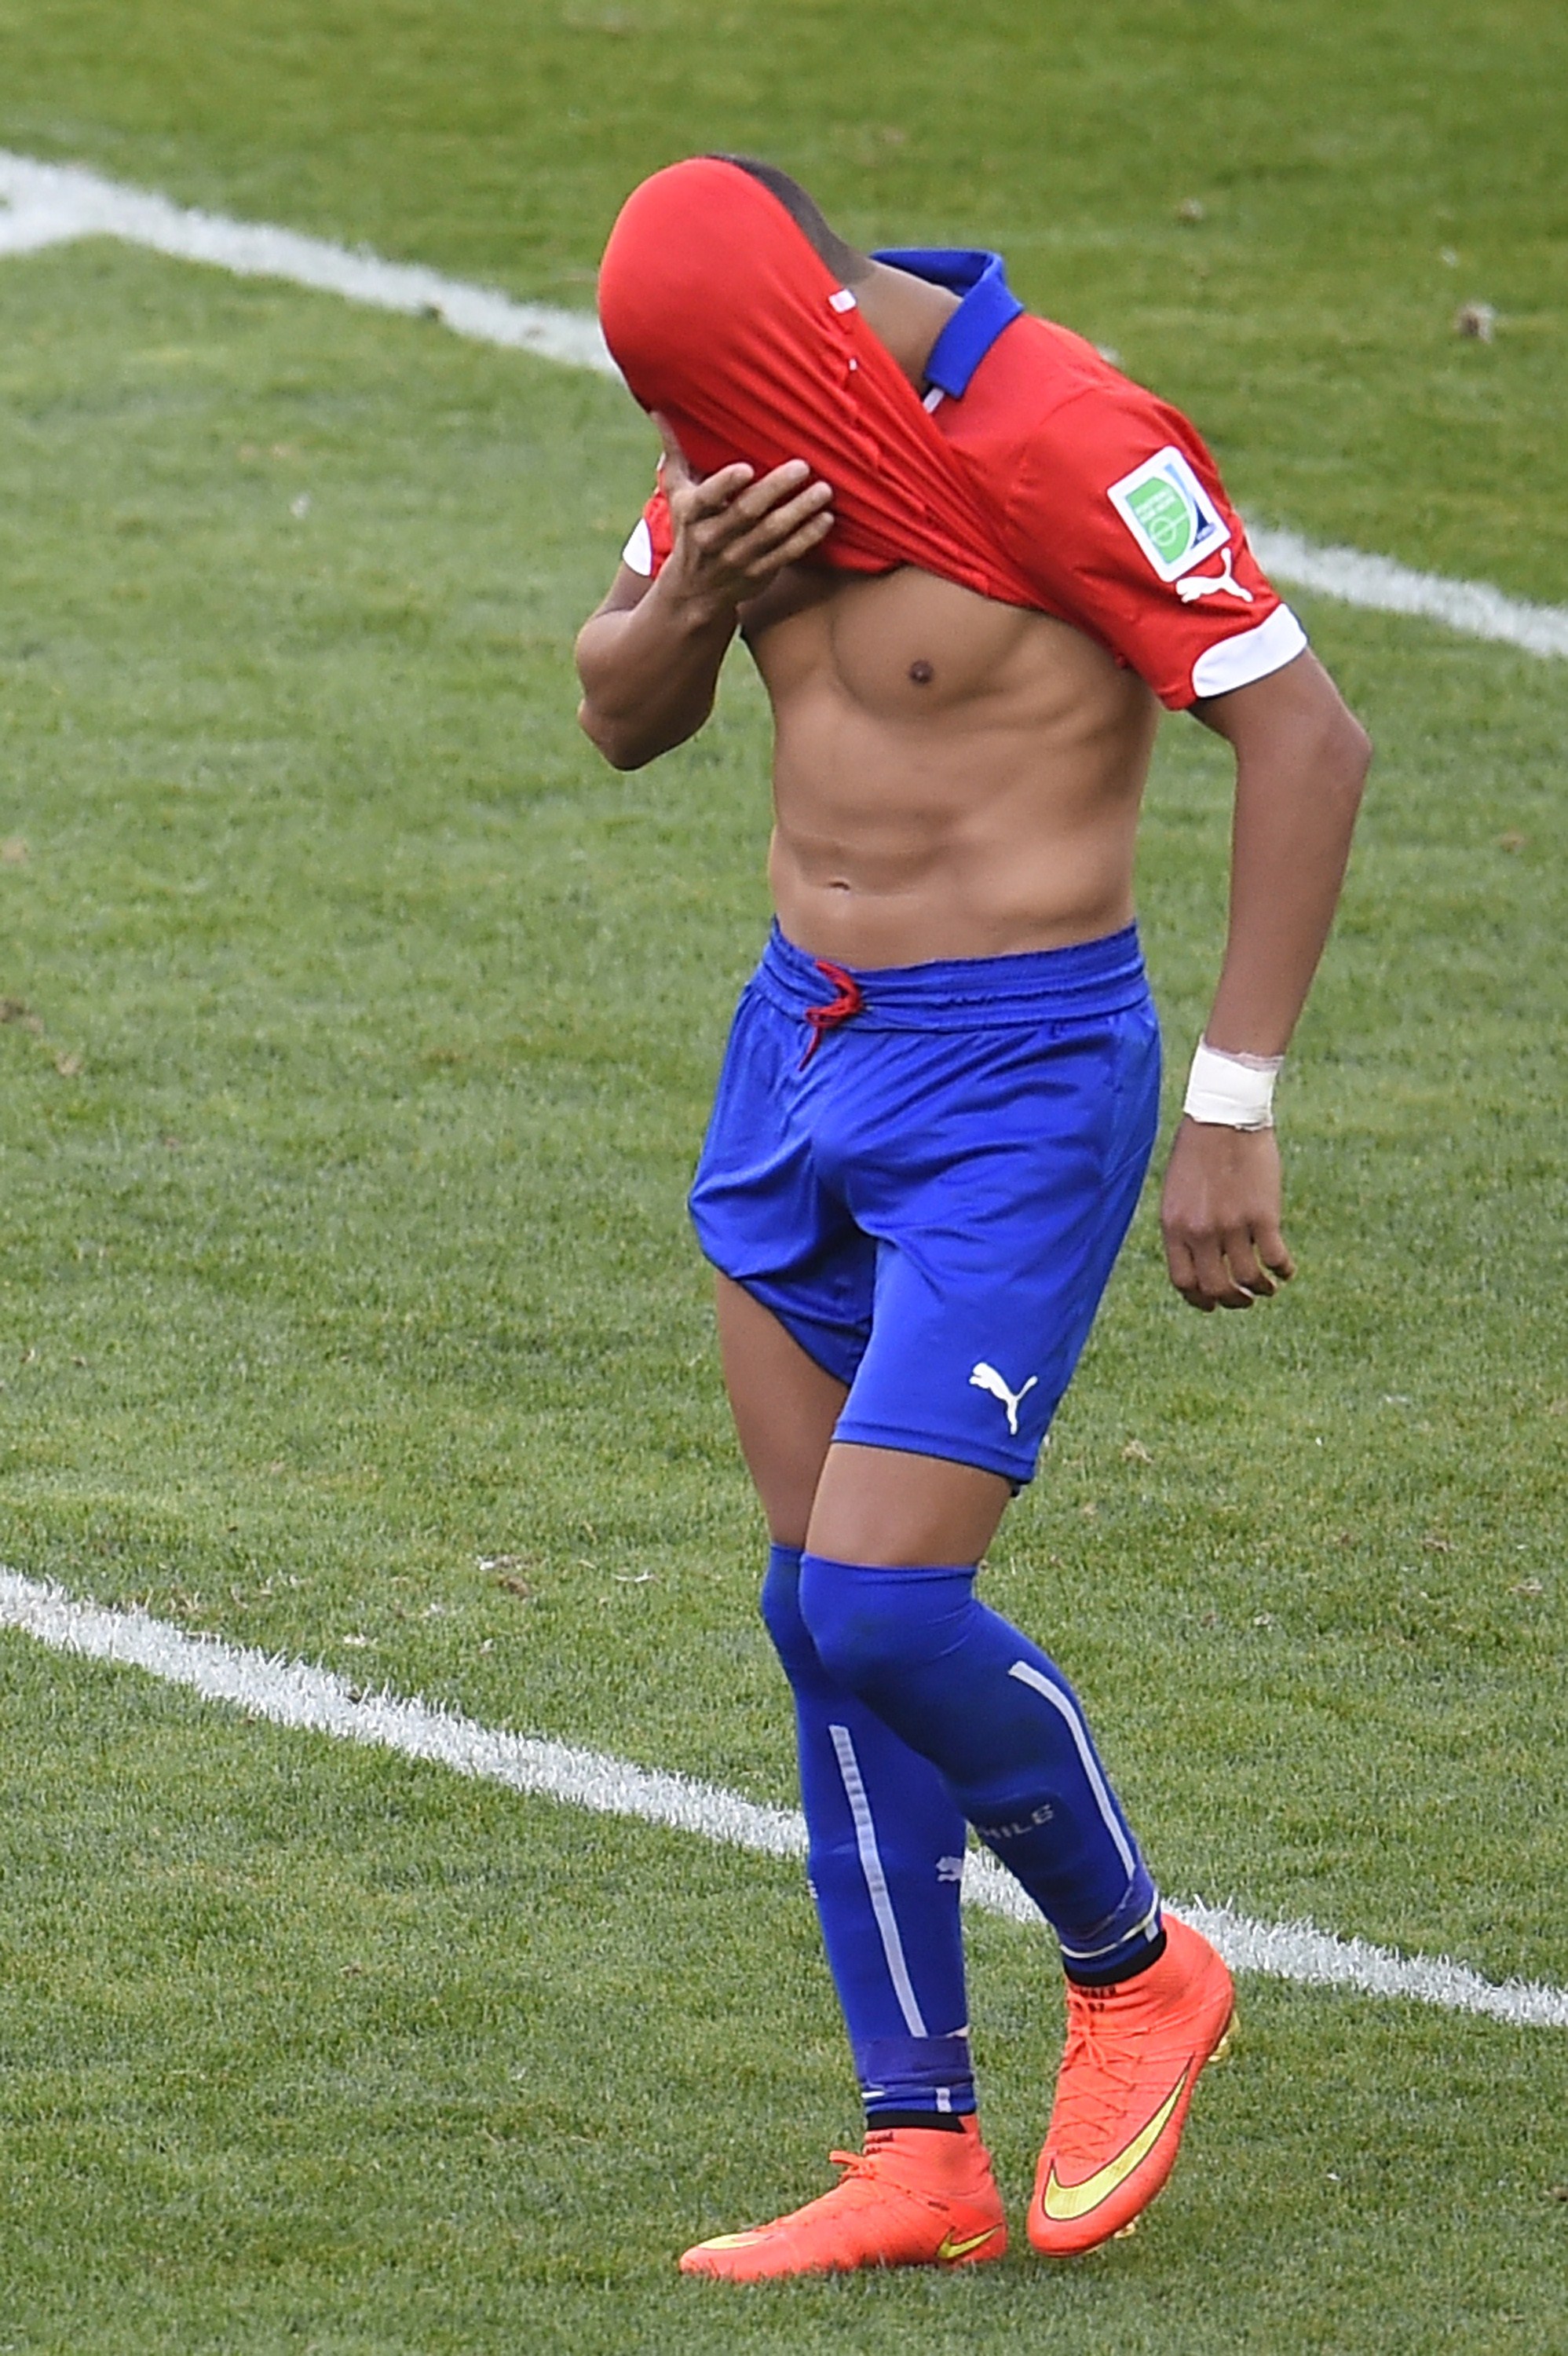 Chile's forward Alexis Sanchez reacts after missing a shot on goal during a football match between Brazil and Chile at the 2014 FIFA World Cup on June 28, 2014. (ODD ANDERSEN—AFP/Getty Images)